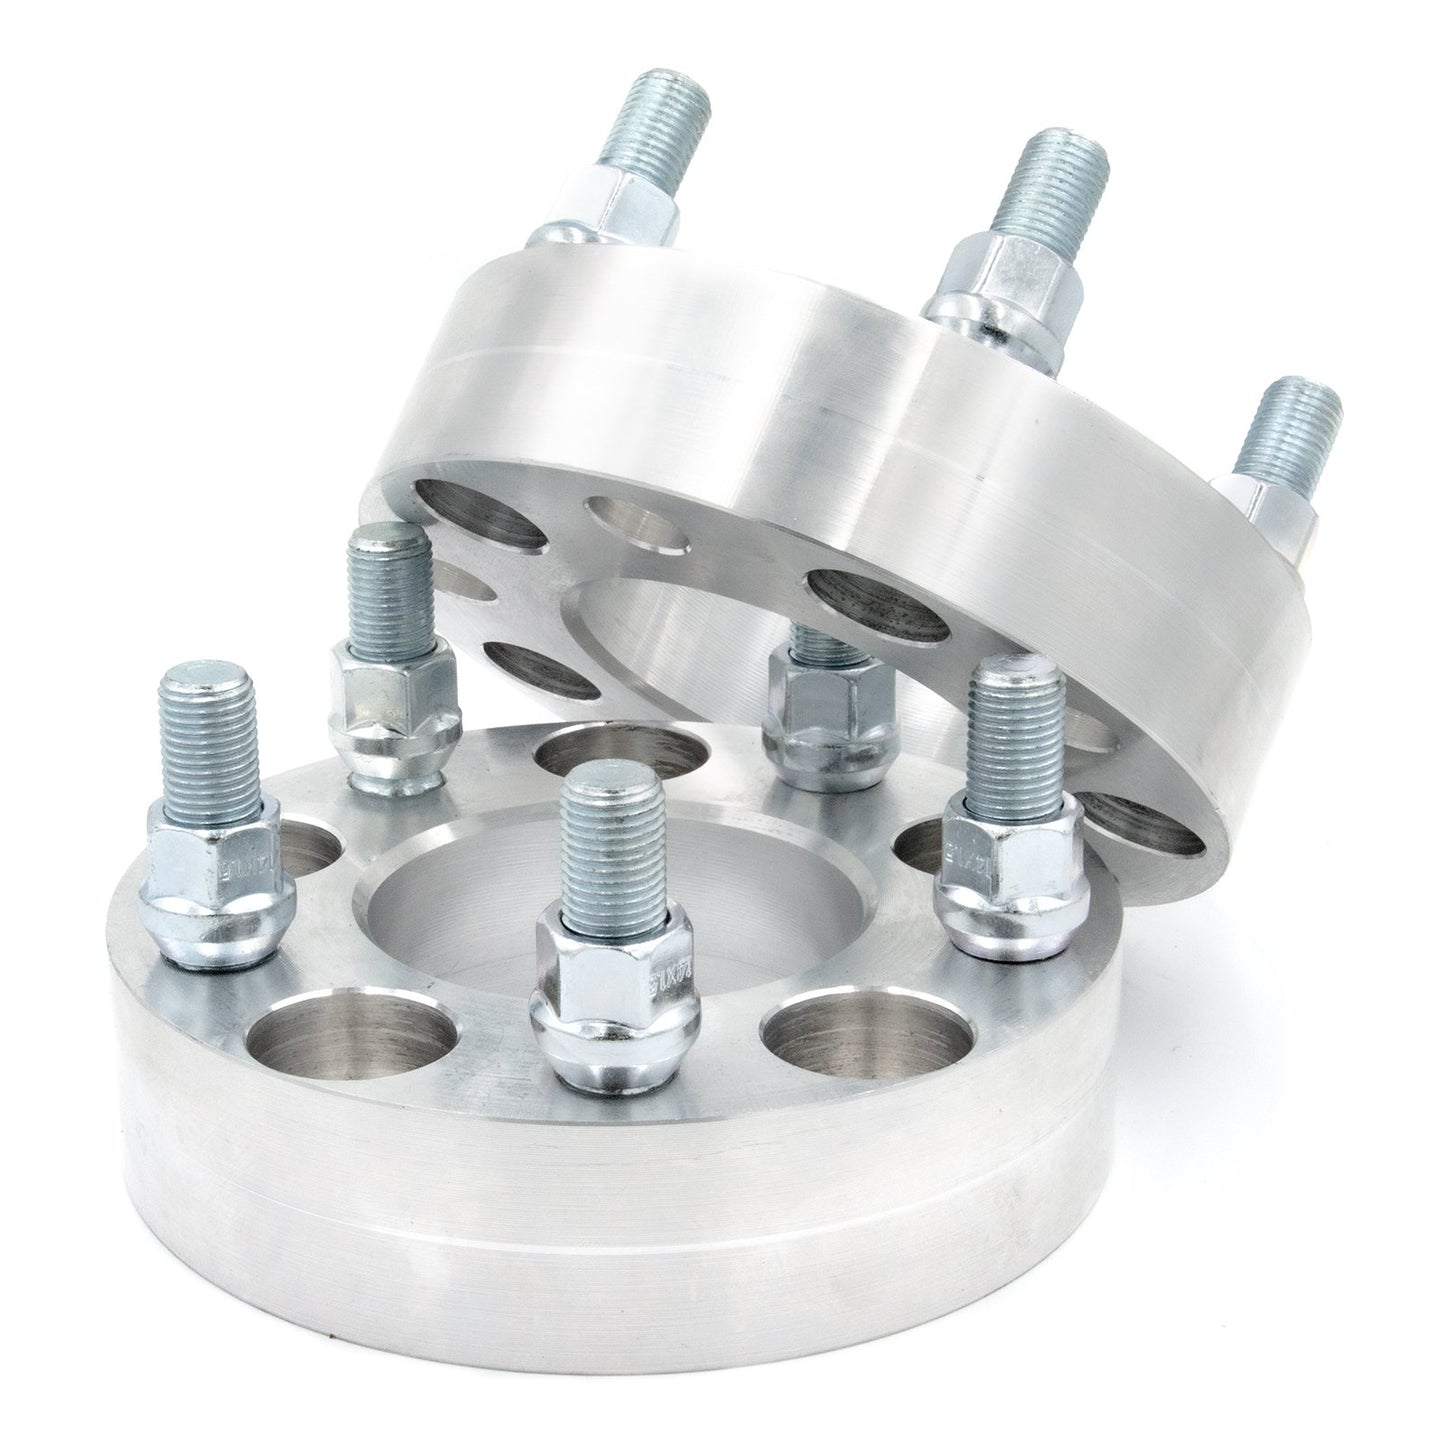 5x130 to 5x115 Wheel Spacer/Adapter - Thickness: 3/4"- 4"